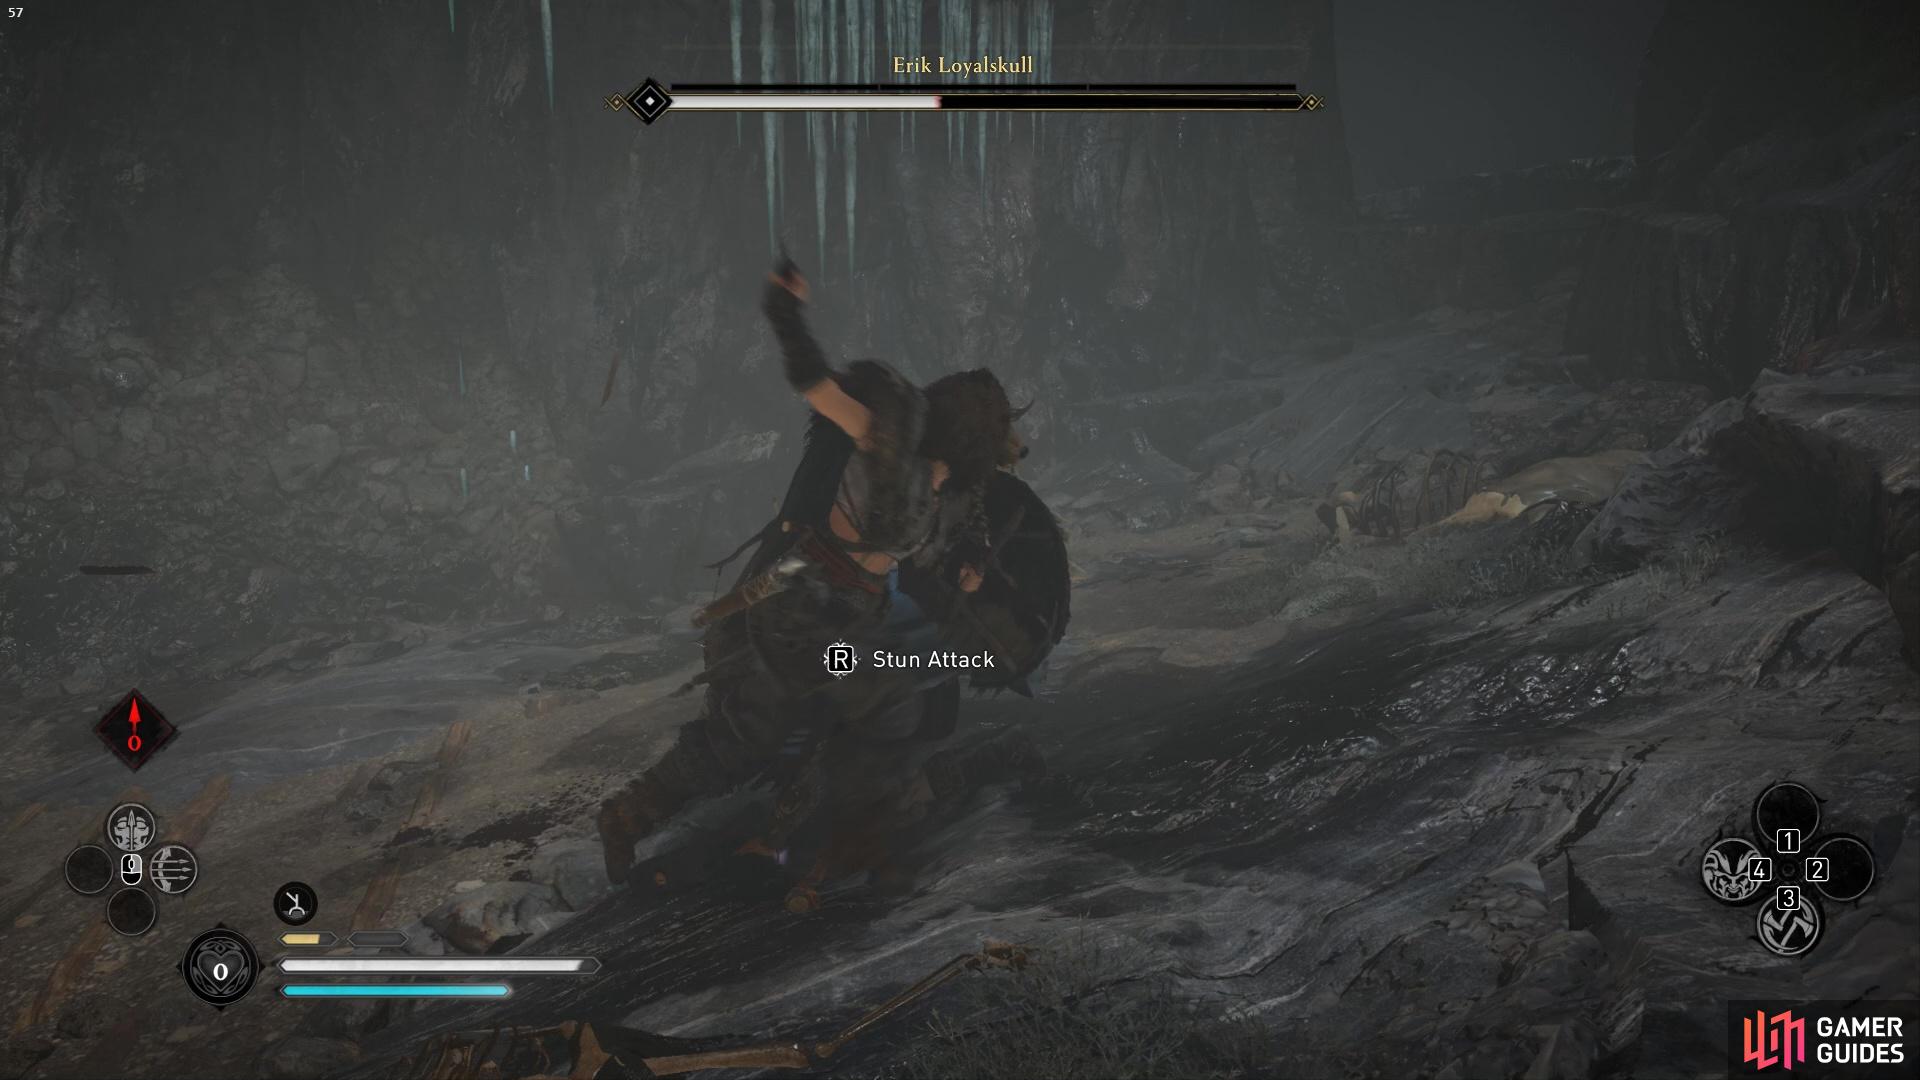 Parrying and shooting his weak points will drain his stamina and youll be able to stun attack him.